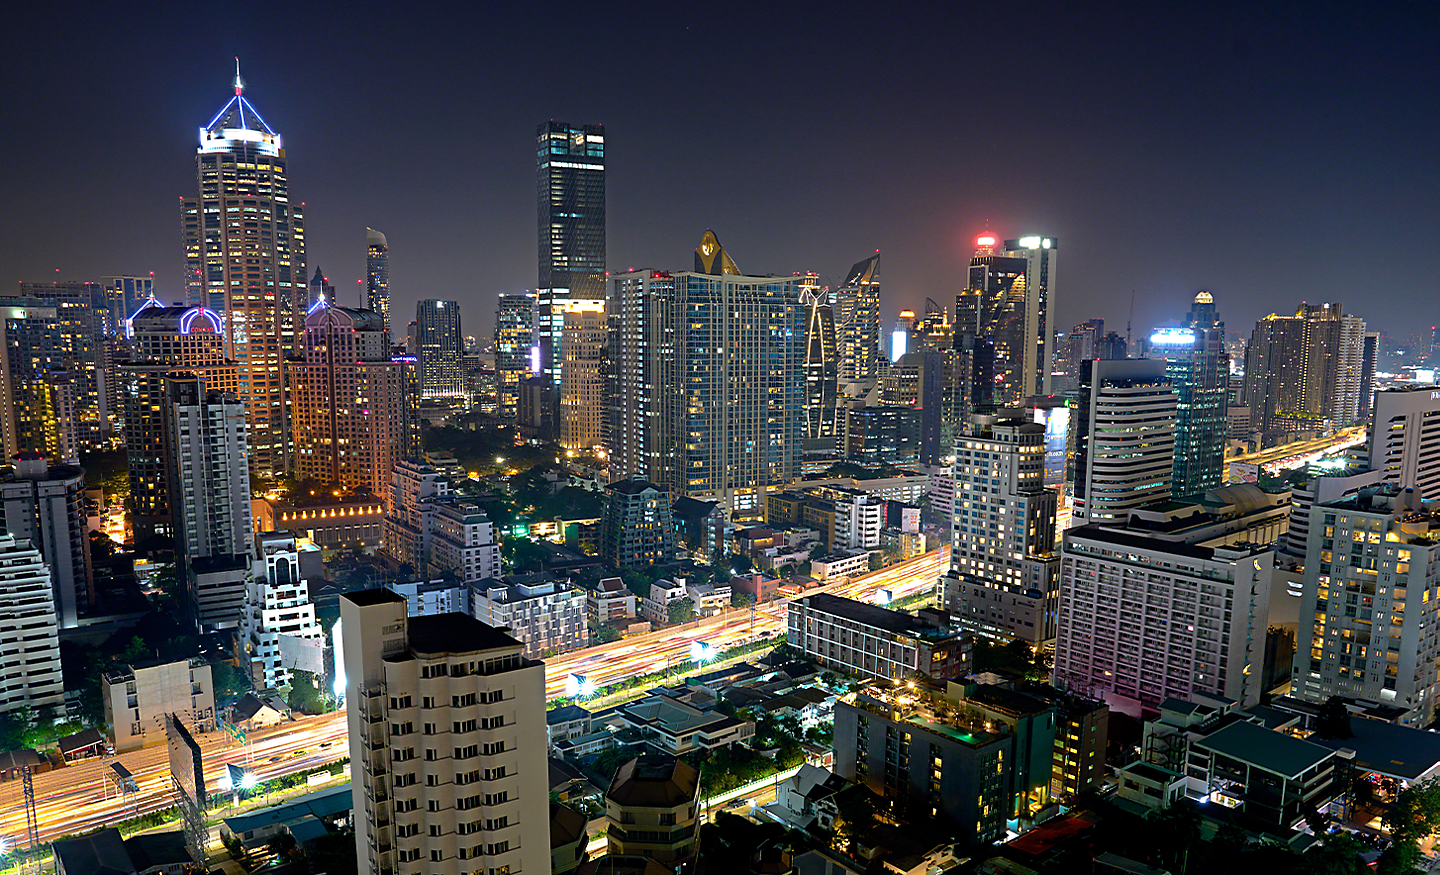 A cityscape at night, photographed from an elevated position 